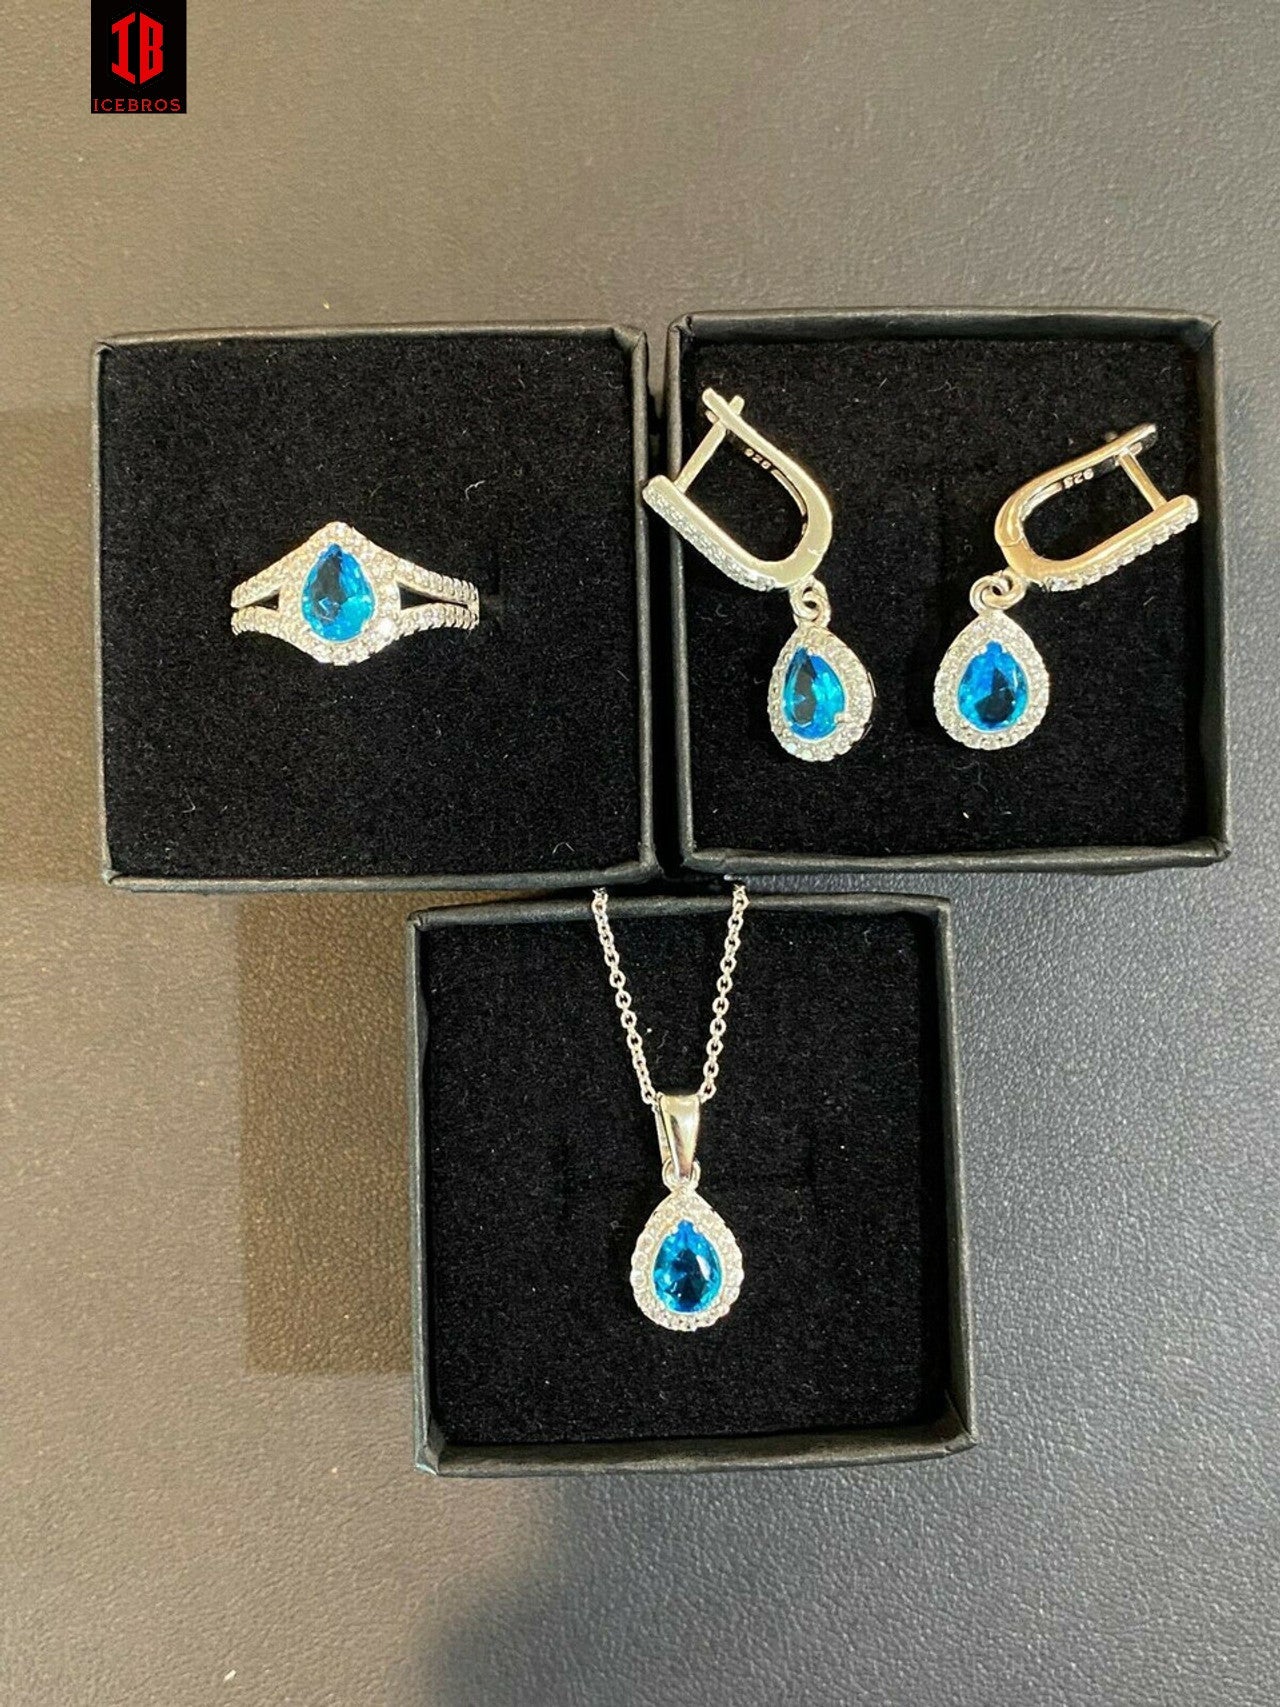 Real 925 Silver Blue Aquamarine Diamond Ring Necklace Earrings Girls Jewelry Set